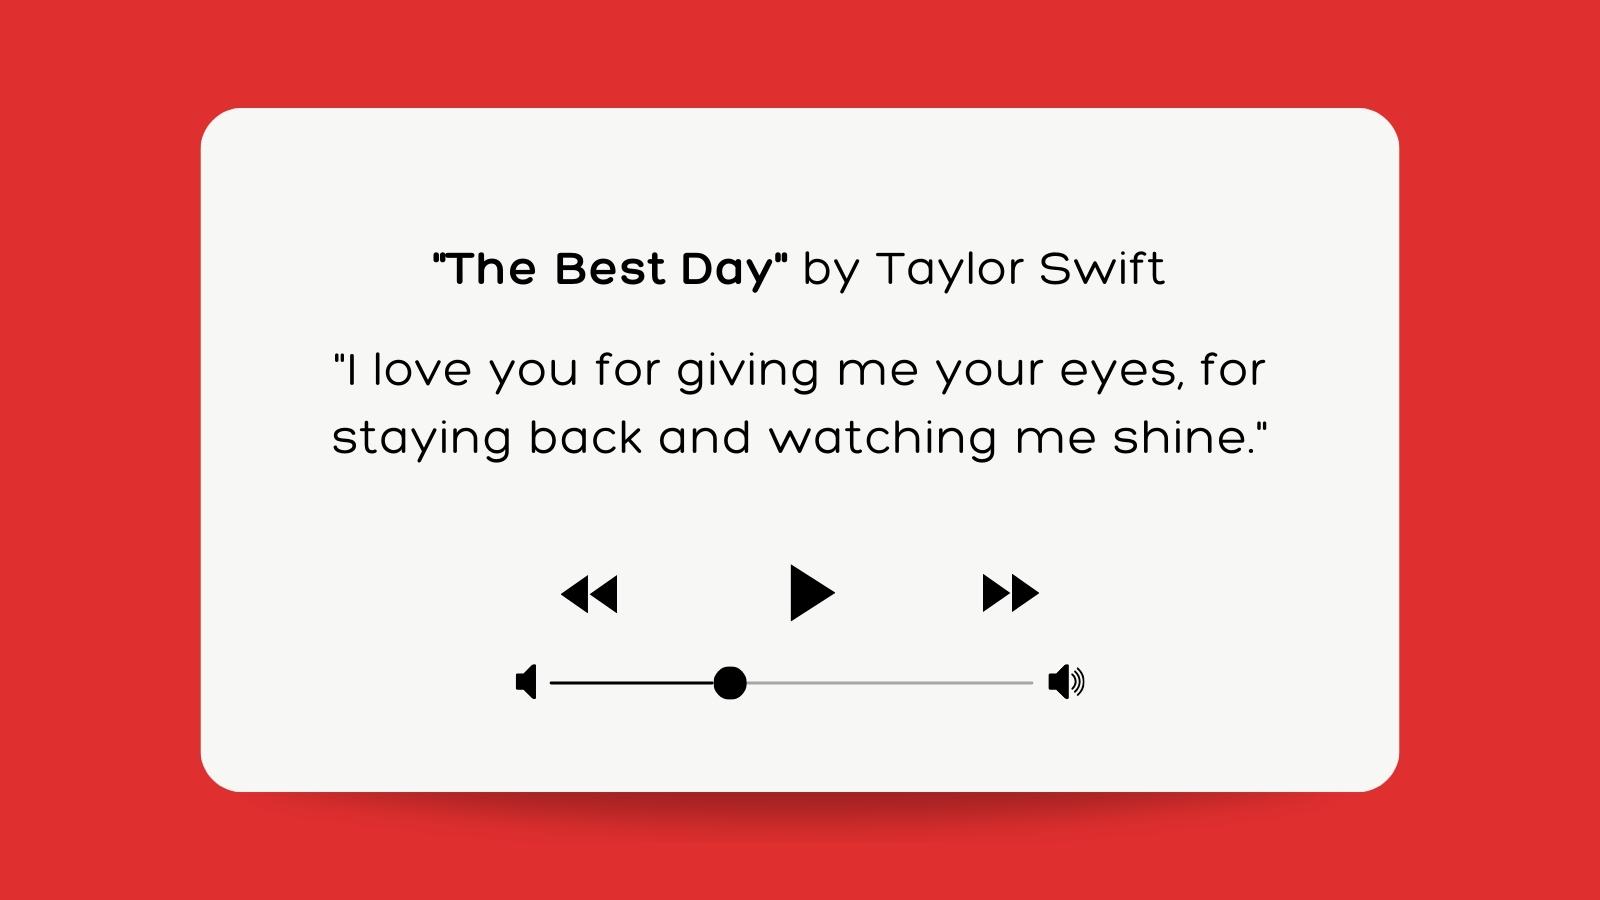 Lyrics from The Best Day by Taylor Swift.